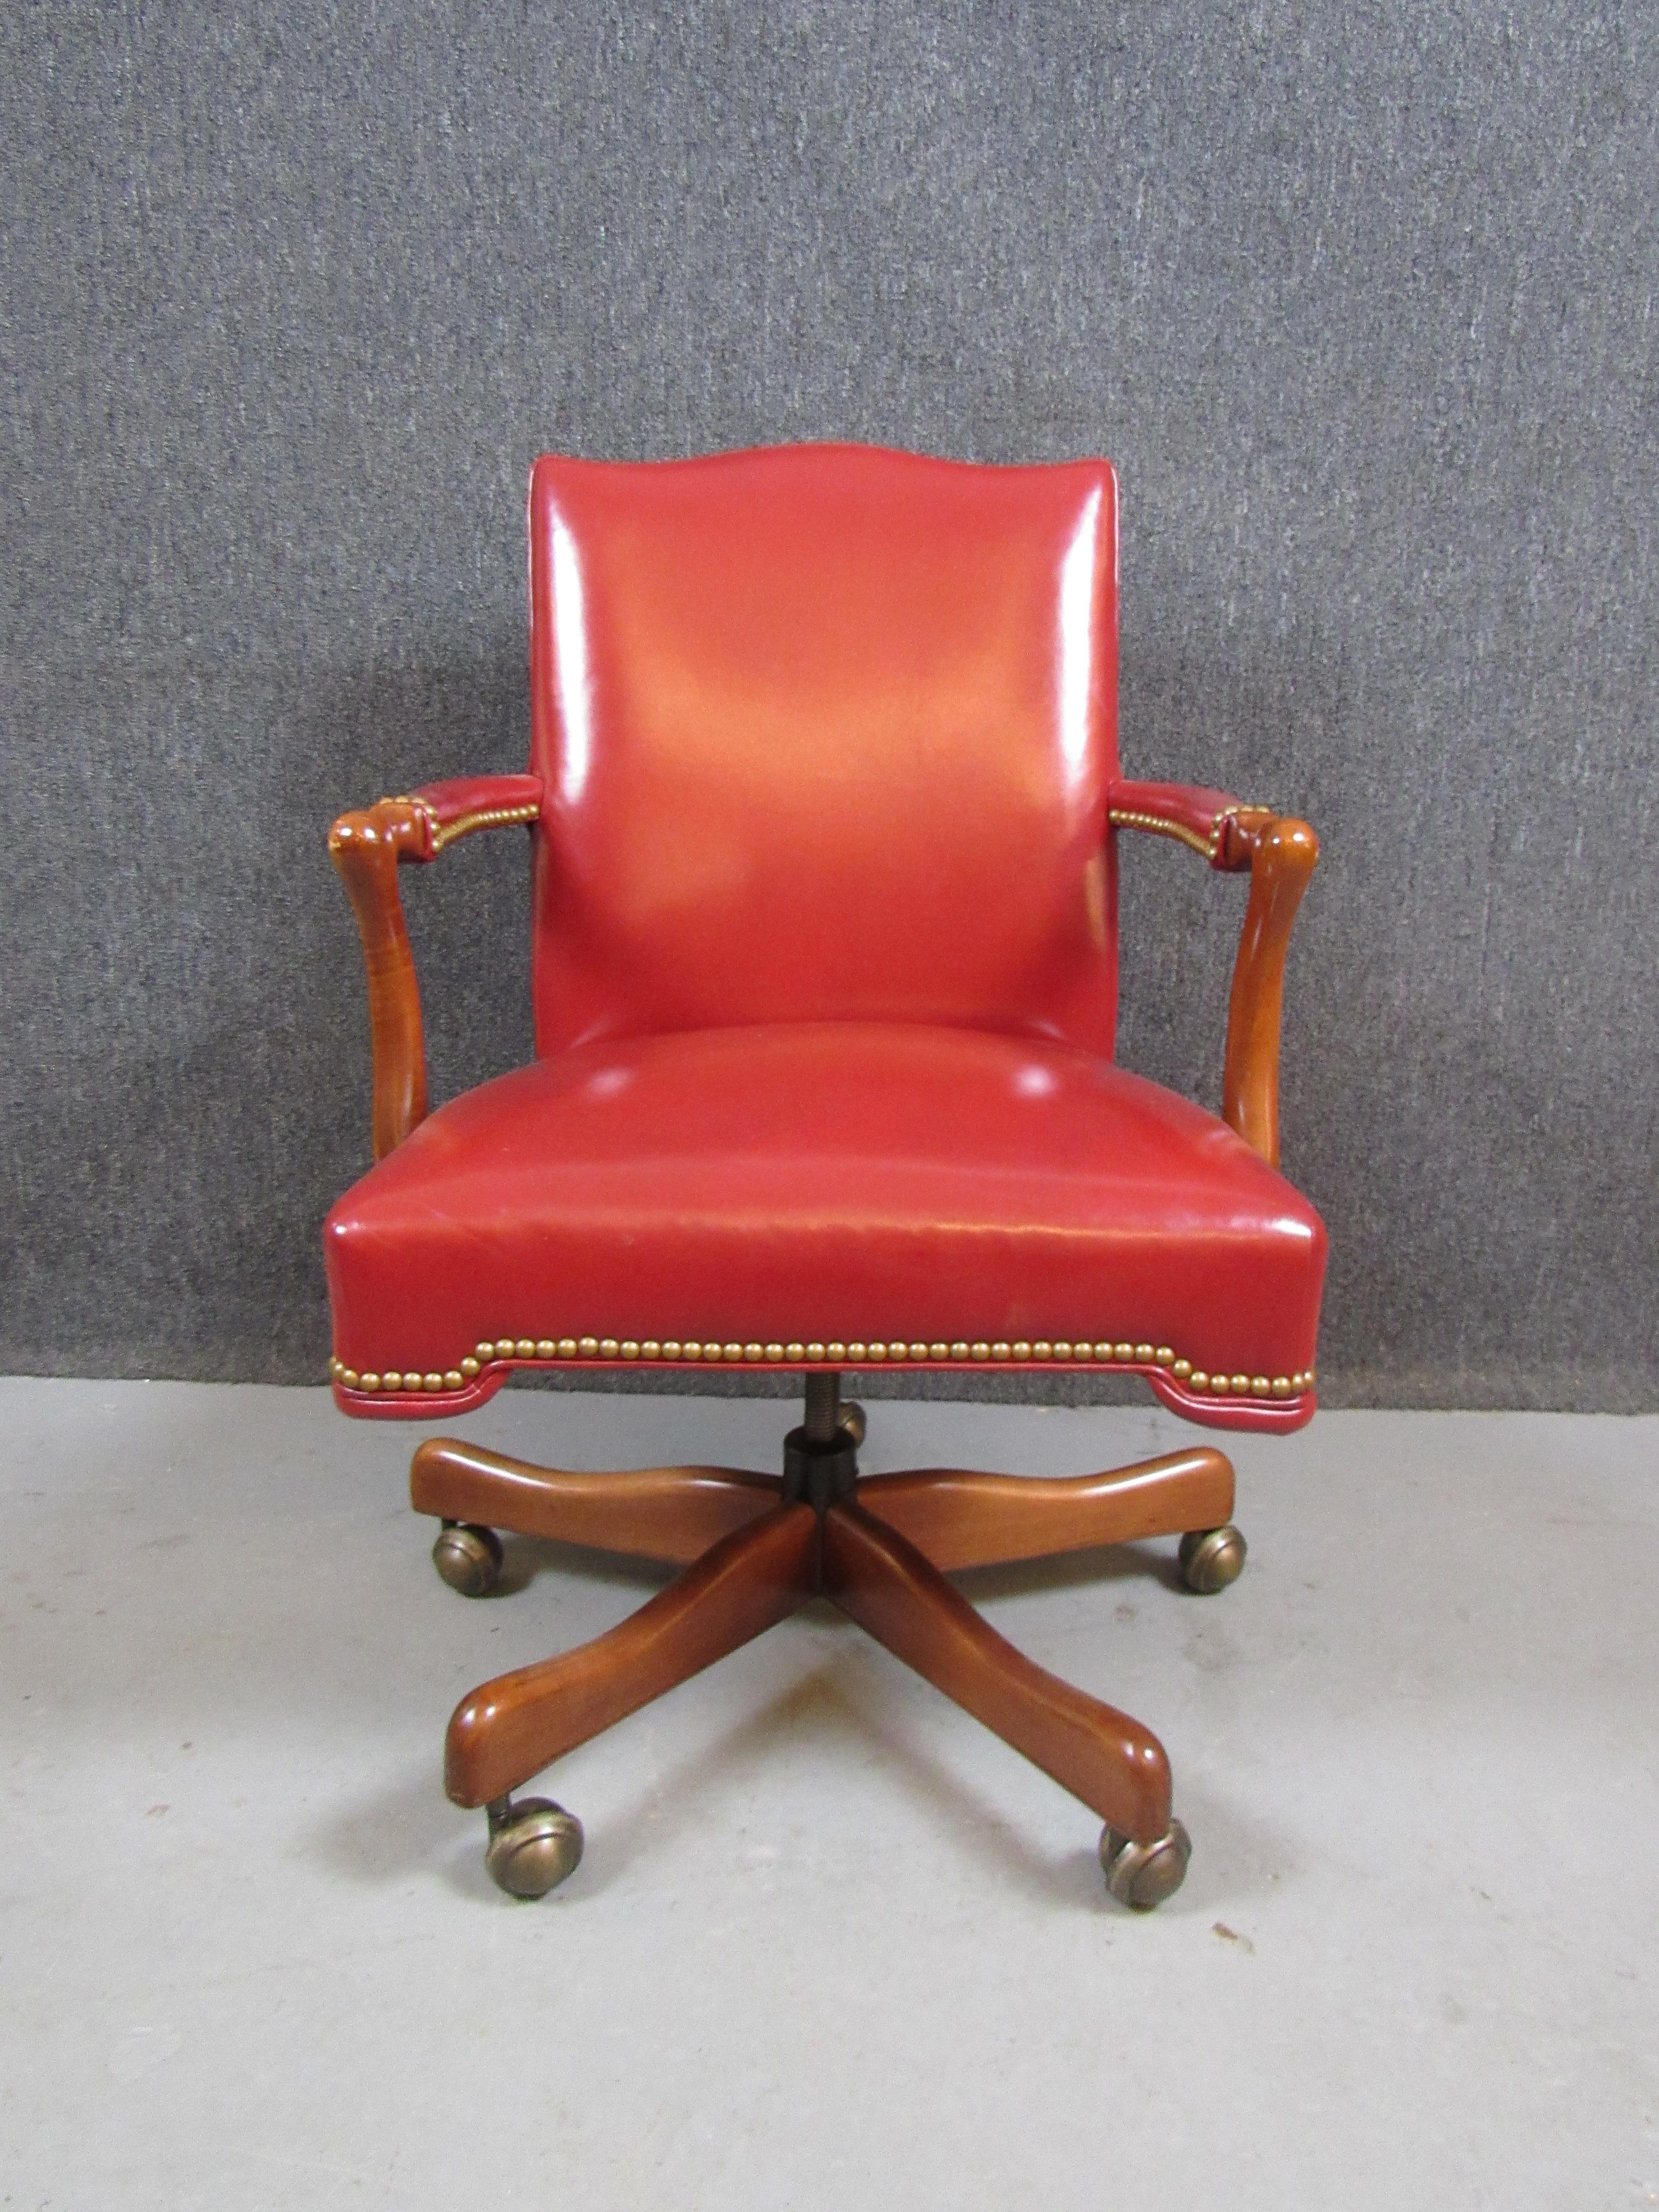 Bring home traditional styling with modern features with this vintage desk chair from North Carolina's Thomasville Furniture. This Chesterfield-influenced swivel chair sports a full red-leather upholstery and a rolling 5-point base. Brass tacks add